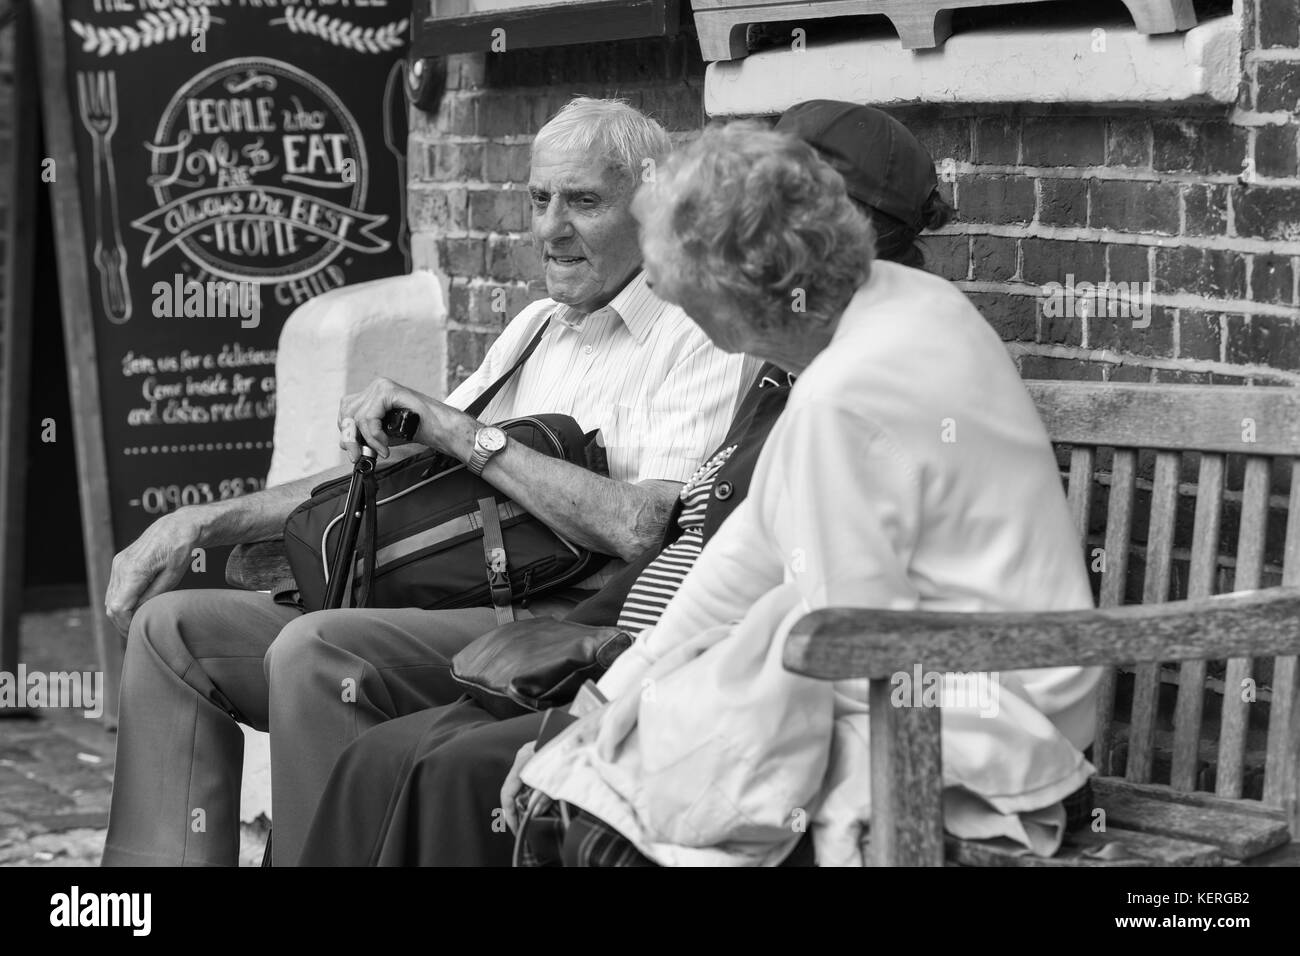 Elderly people sitting on a wooden bench outside catching up, in black and white monotone. Stock Photo